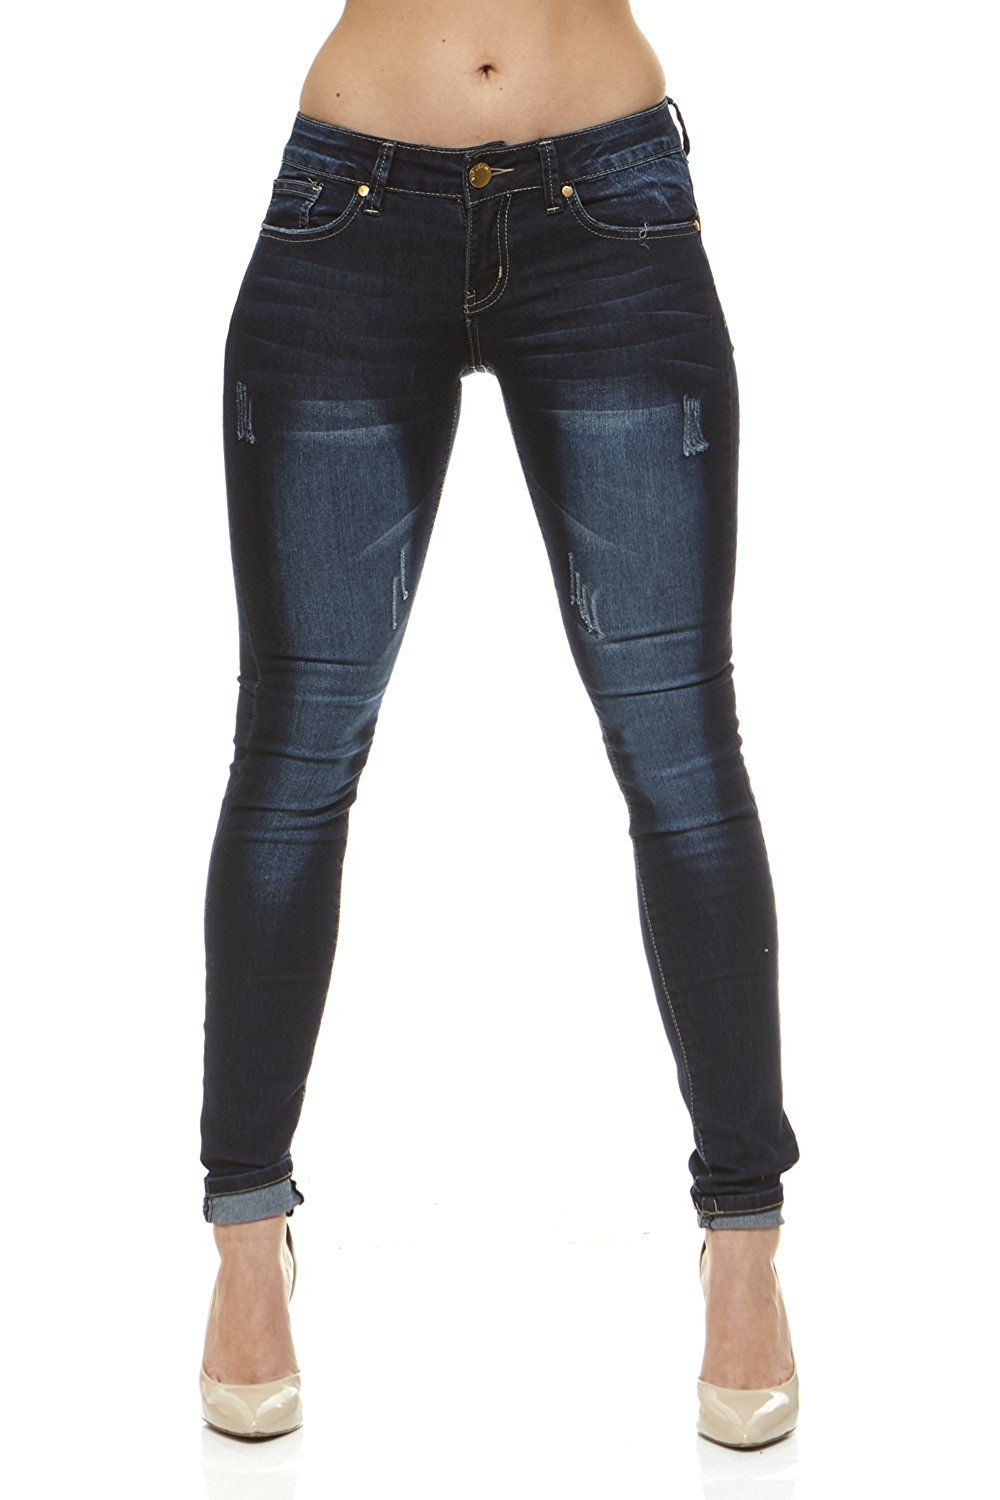 Classic Skinny Jeans for Women Slim Fit Stretch Stone Washed Jeans